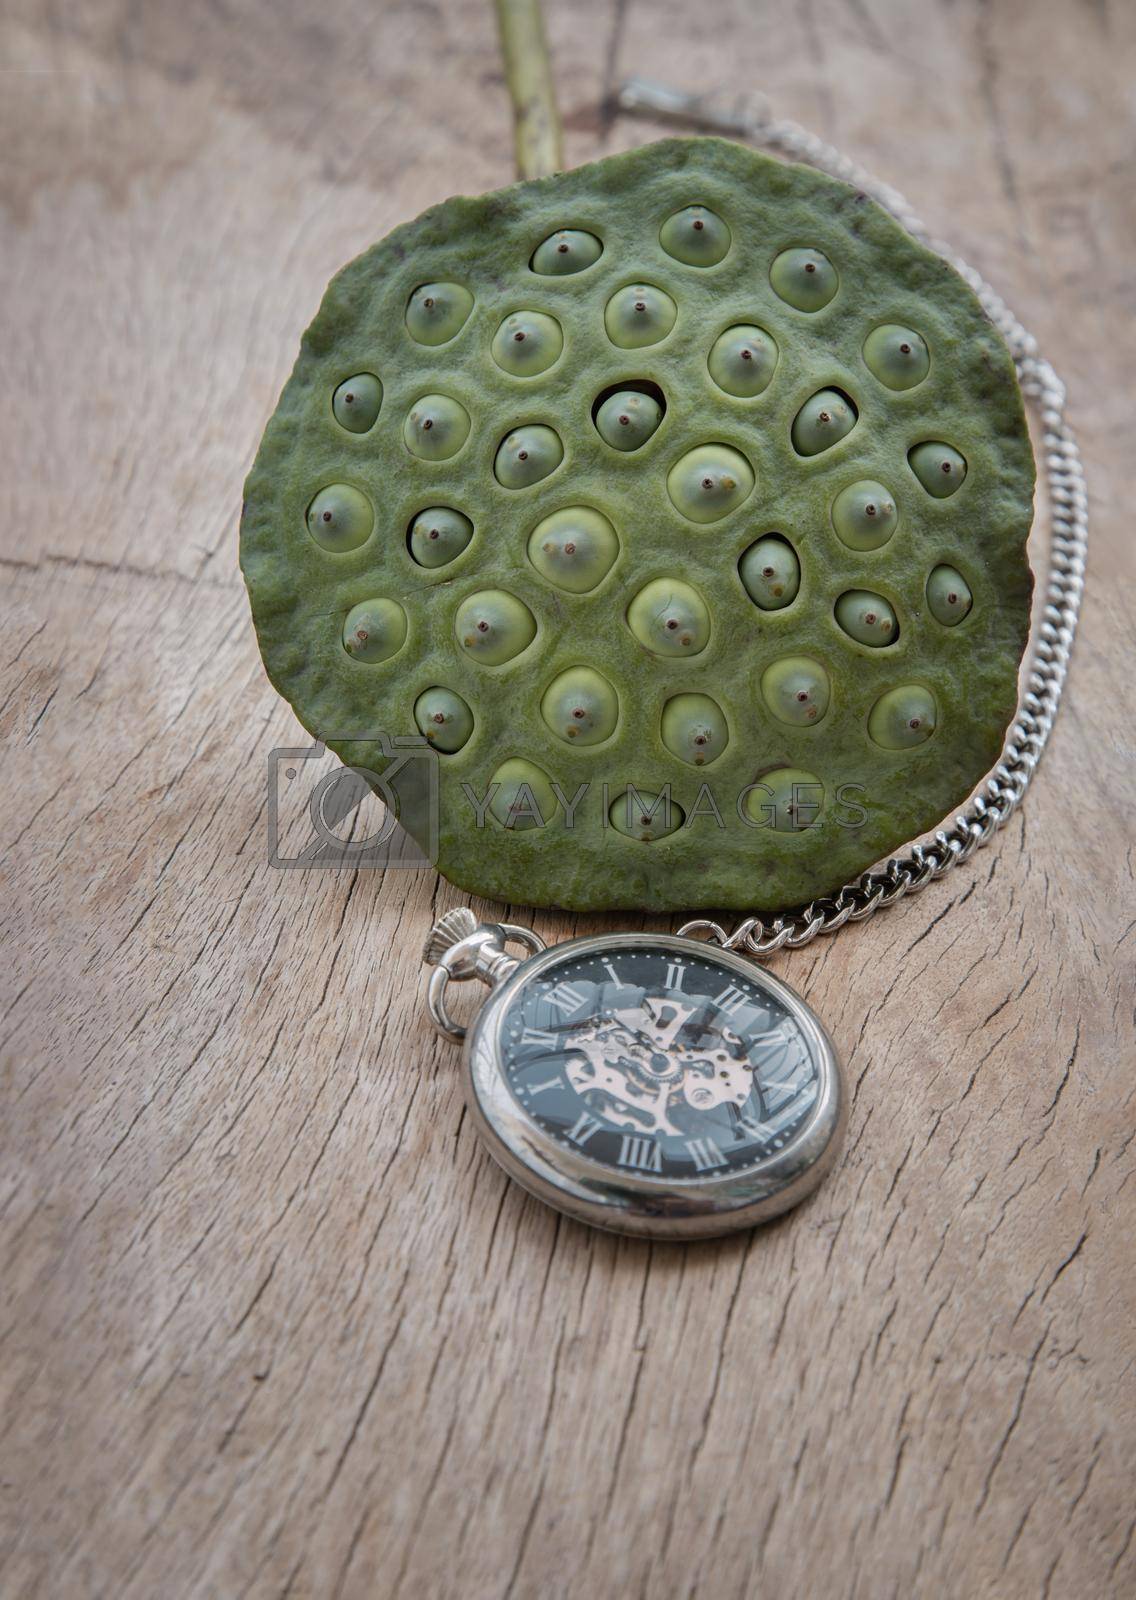 A retro pocket watch and Fresh green lotus seed pods on old wooden board background. Time and Peace conept, Copy space, Selective focus.